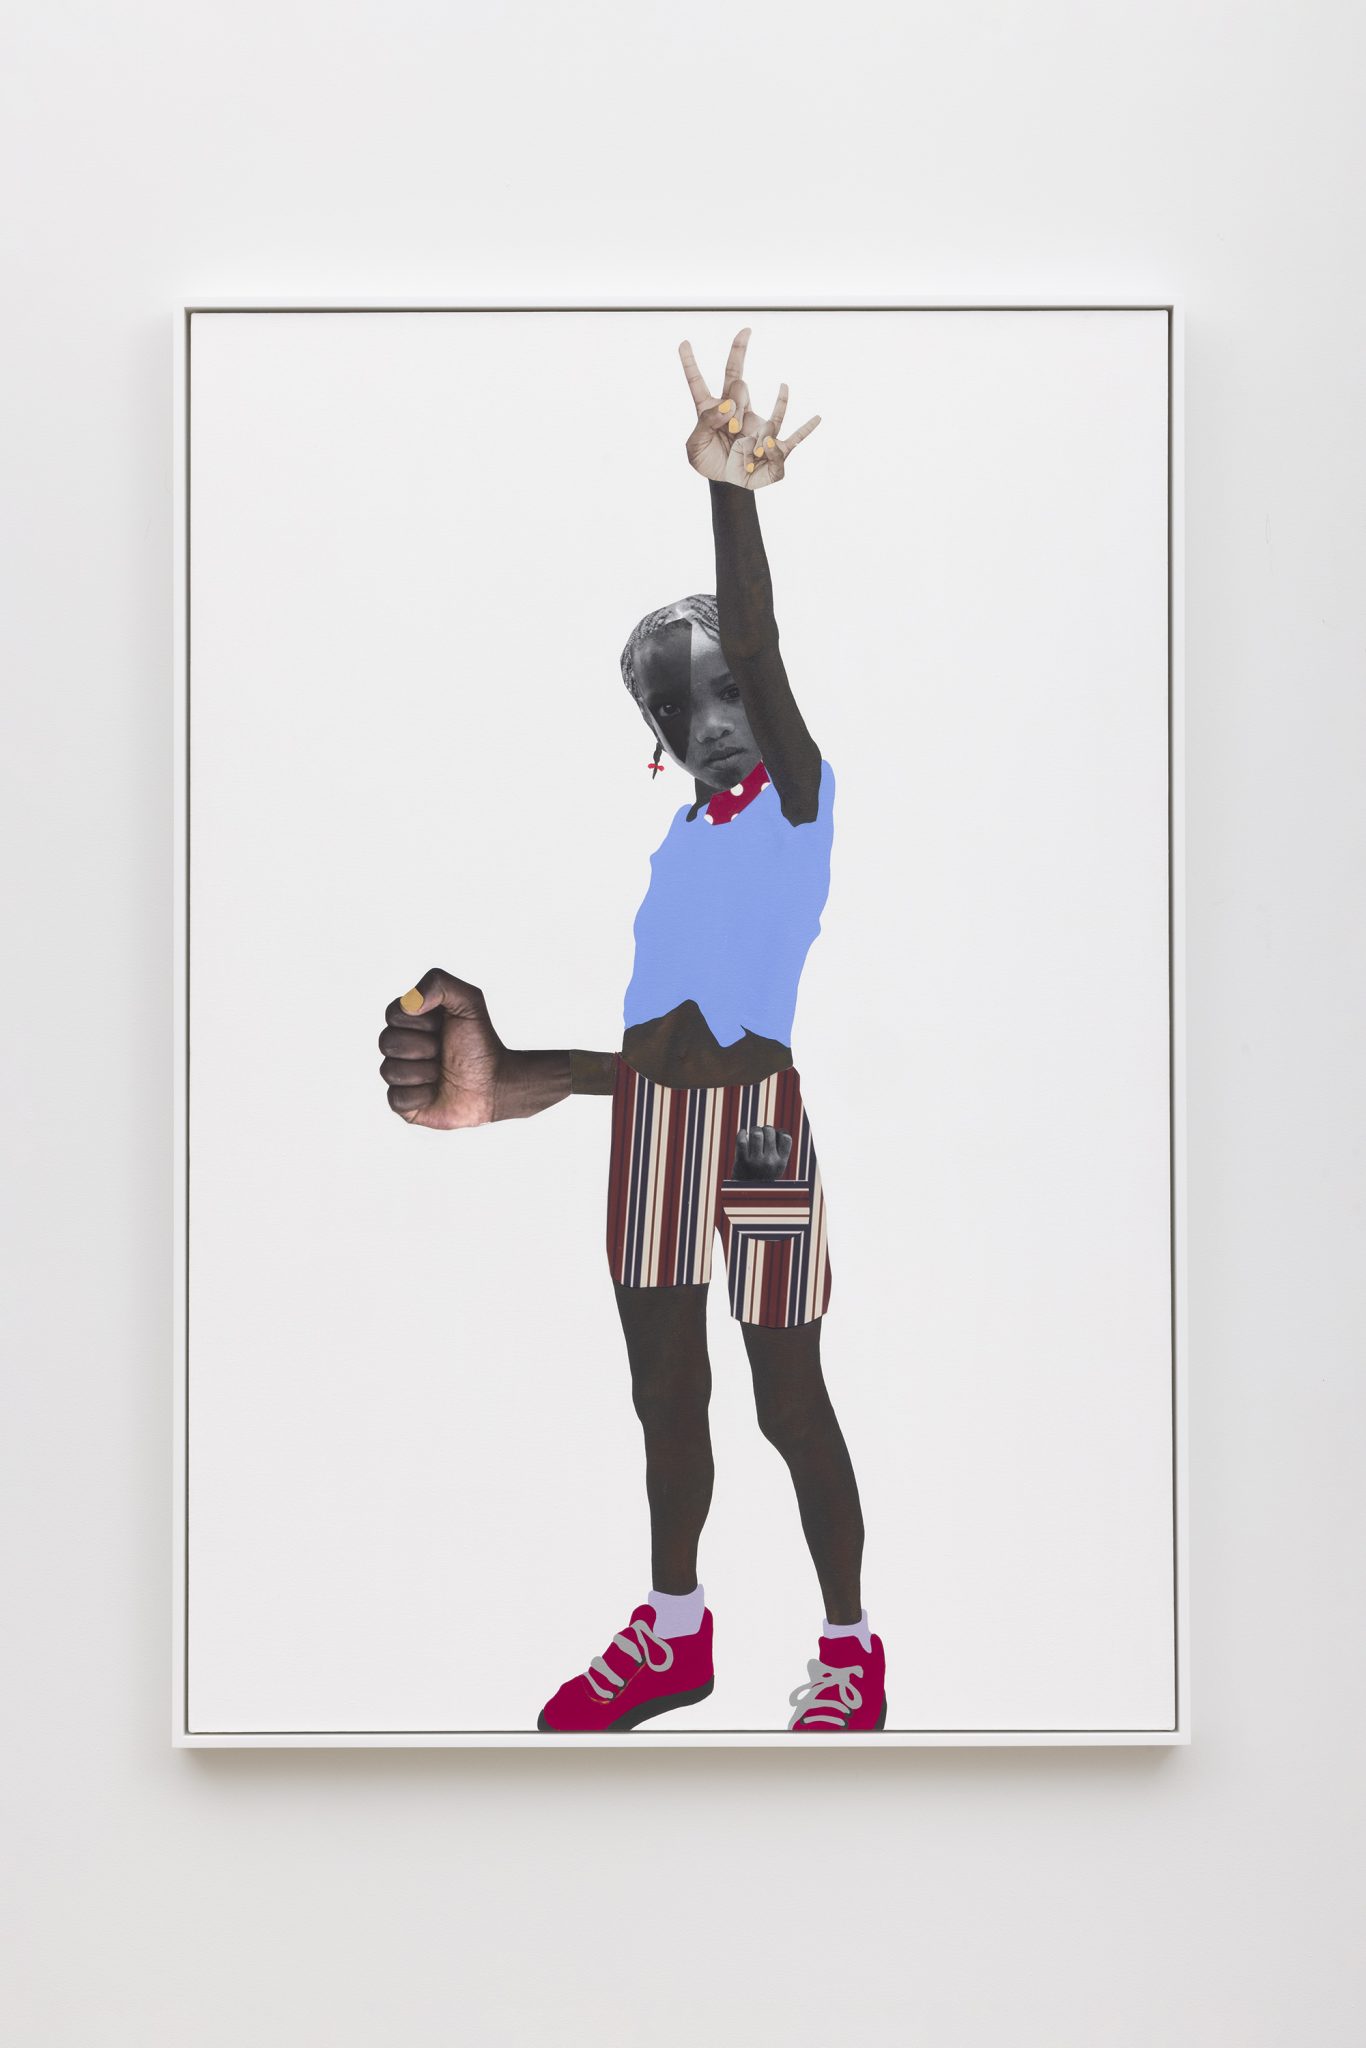 Multiplicity: Blackness in Contemporary American Collage - Frist Art Museum